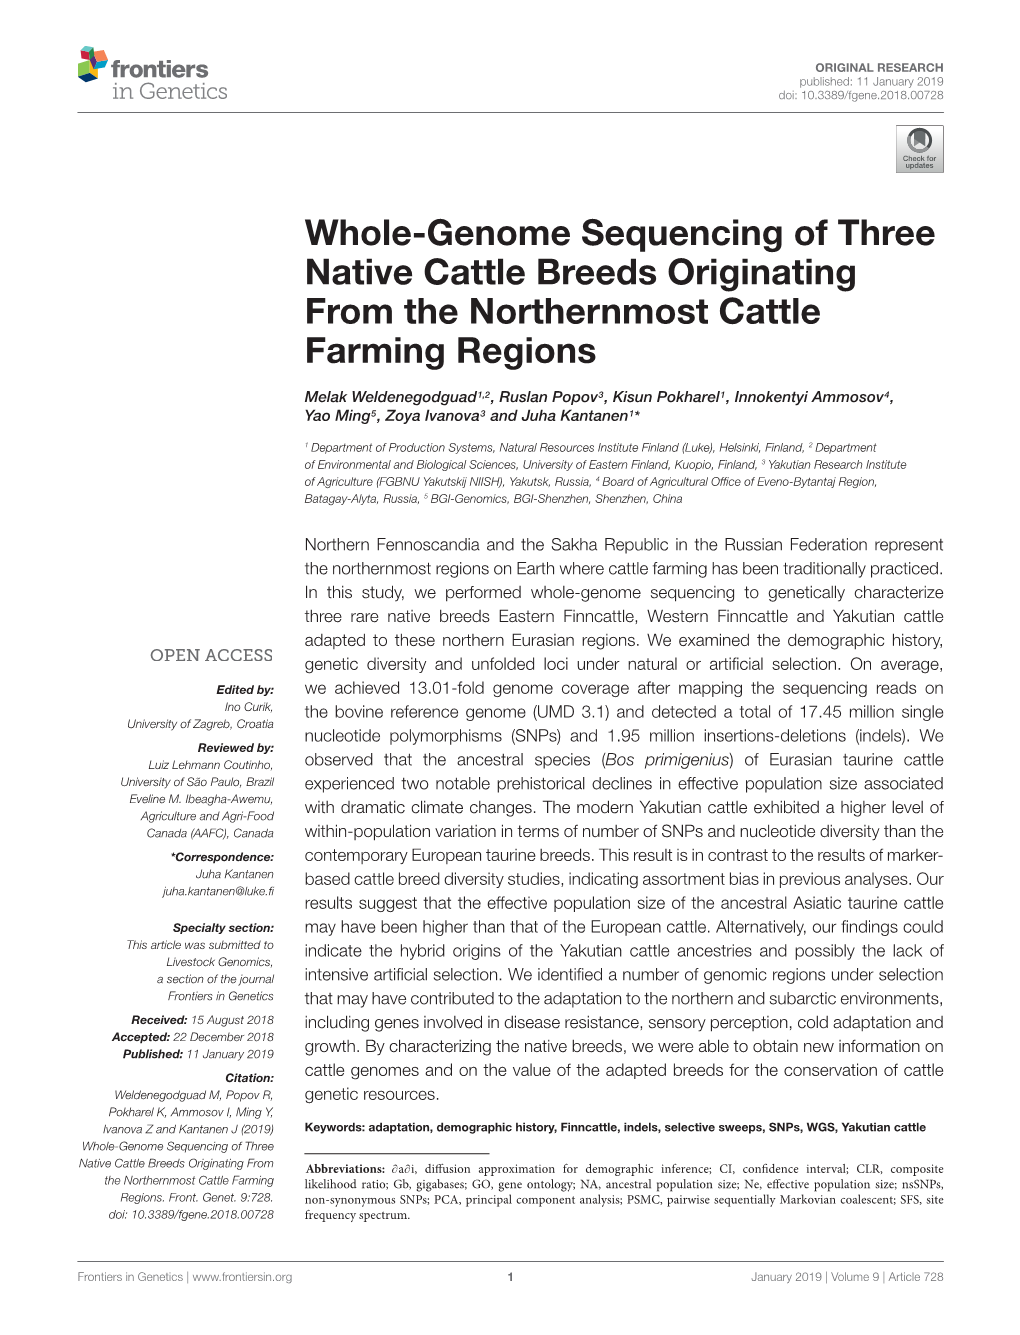 Whole-Genome Sequencing of Three Native Cattle Breeds Originating from the Northernmost Cattle Farming Regions